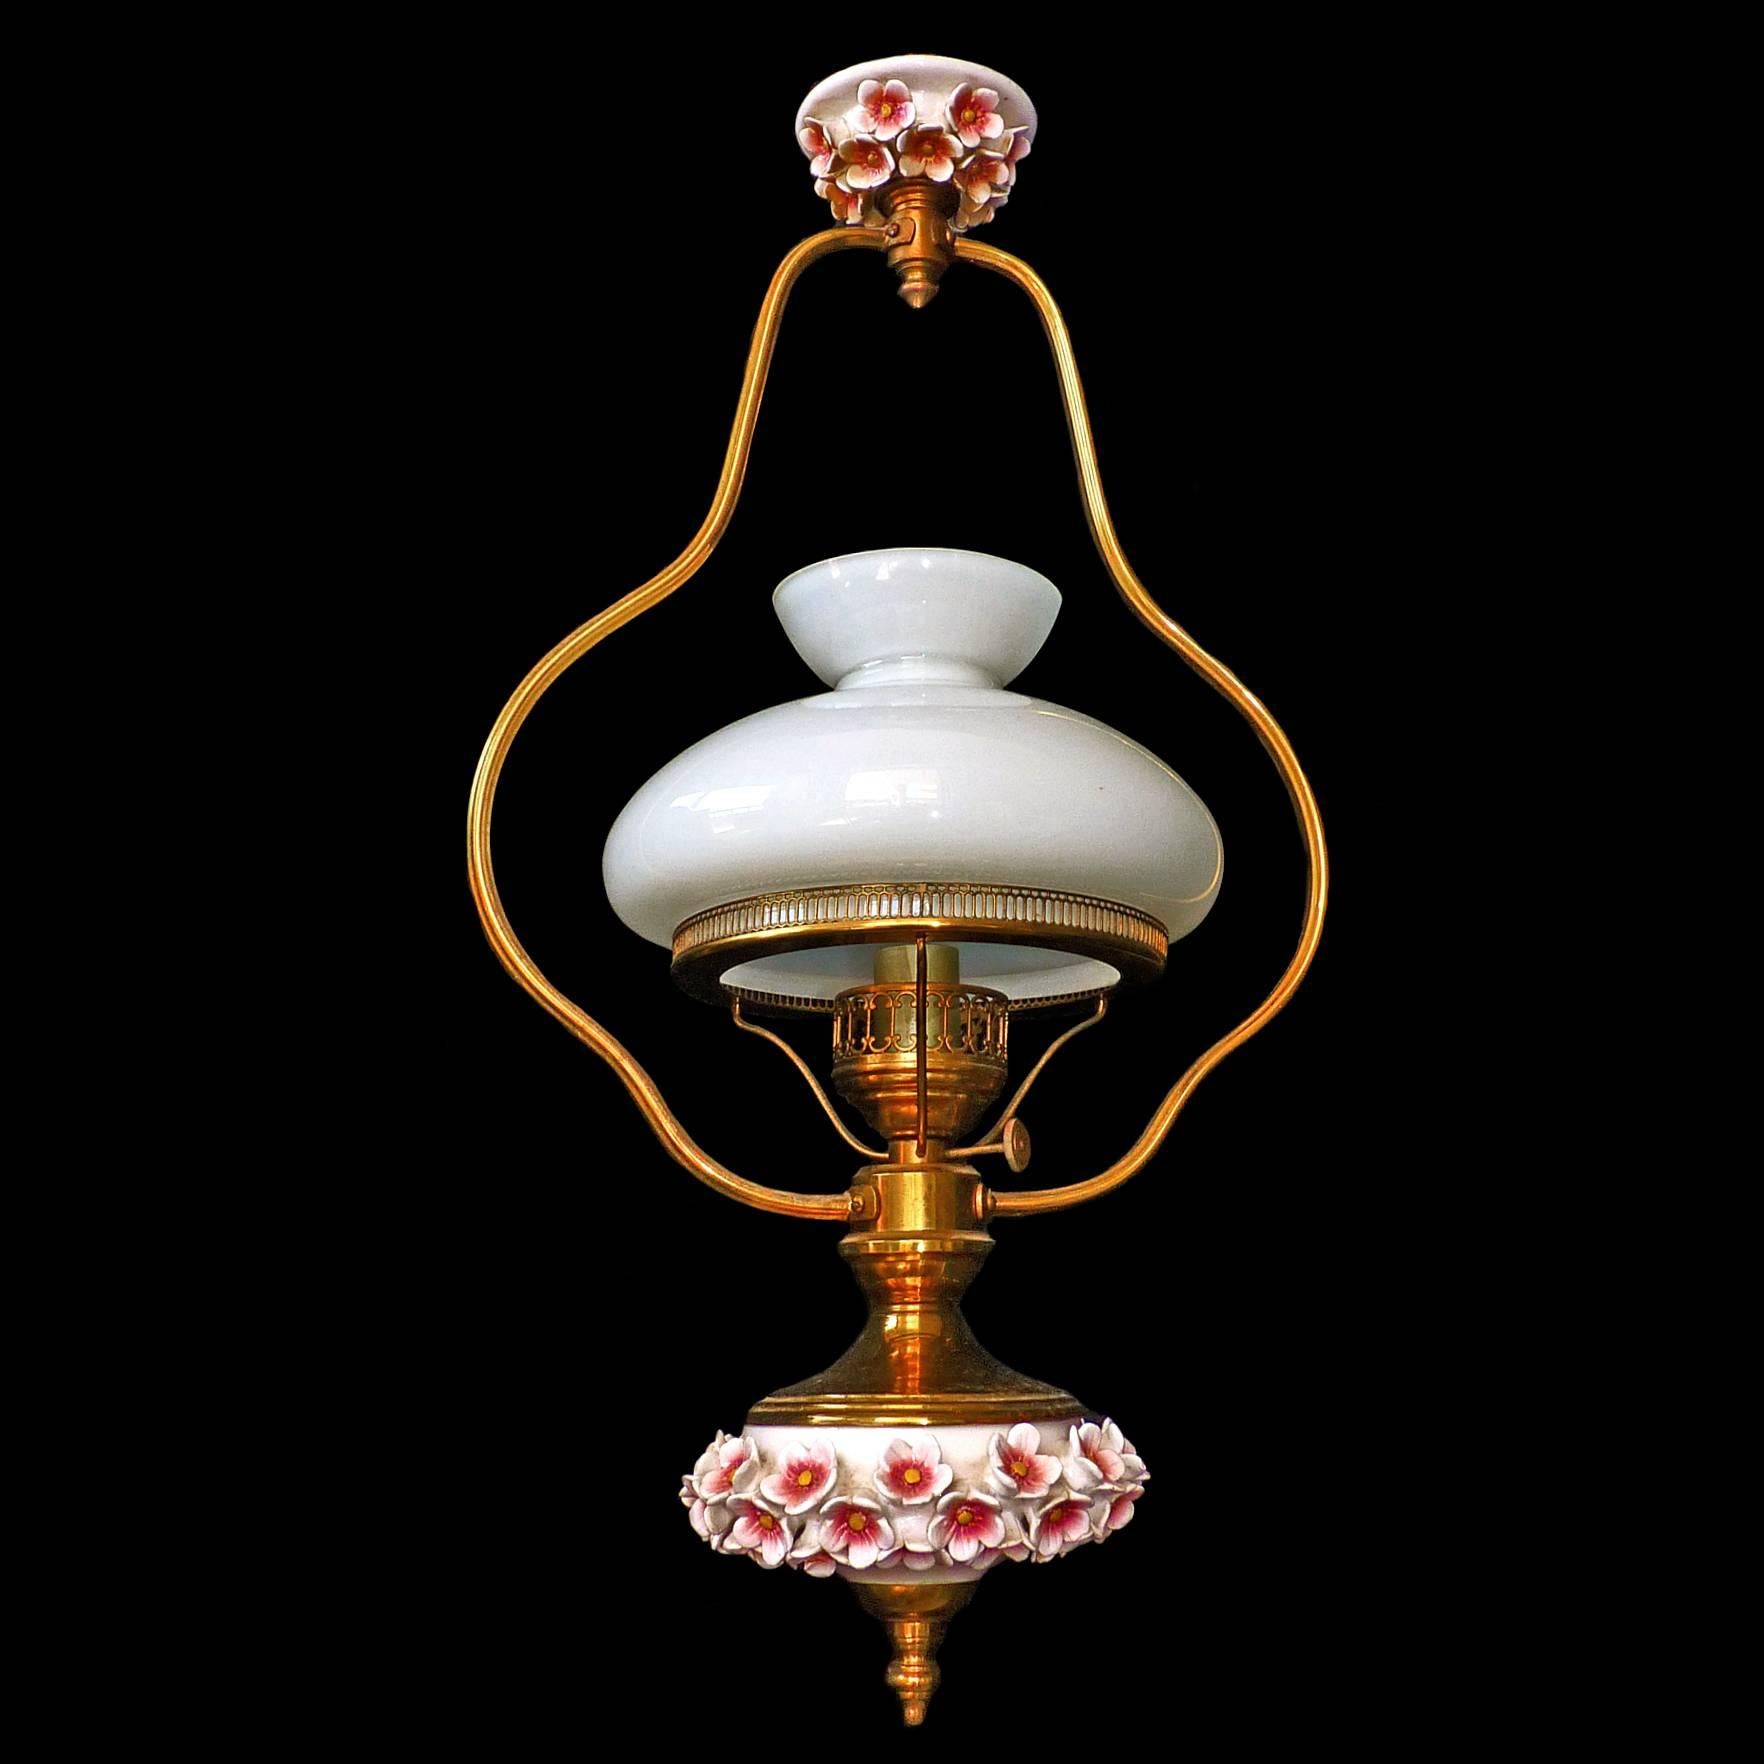 Adorable small antique 1950 Victorian hanging lamp French chandelier
With opaline glass shade and sculpted ceramic daisy applique porcelain.
Materials: Opaline glass/porcelain/ gilt metal
Measures:
Diameter: 12 in / 30 cm
Height: 40 in (25 in + 15